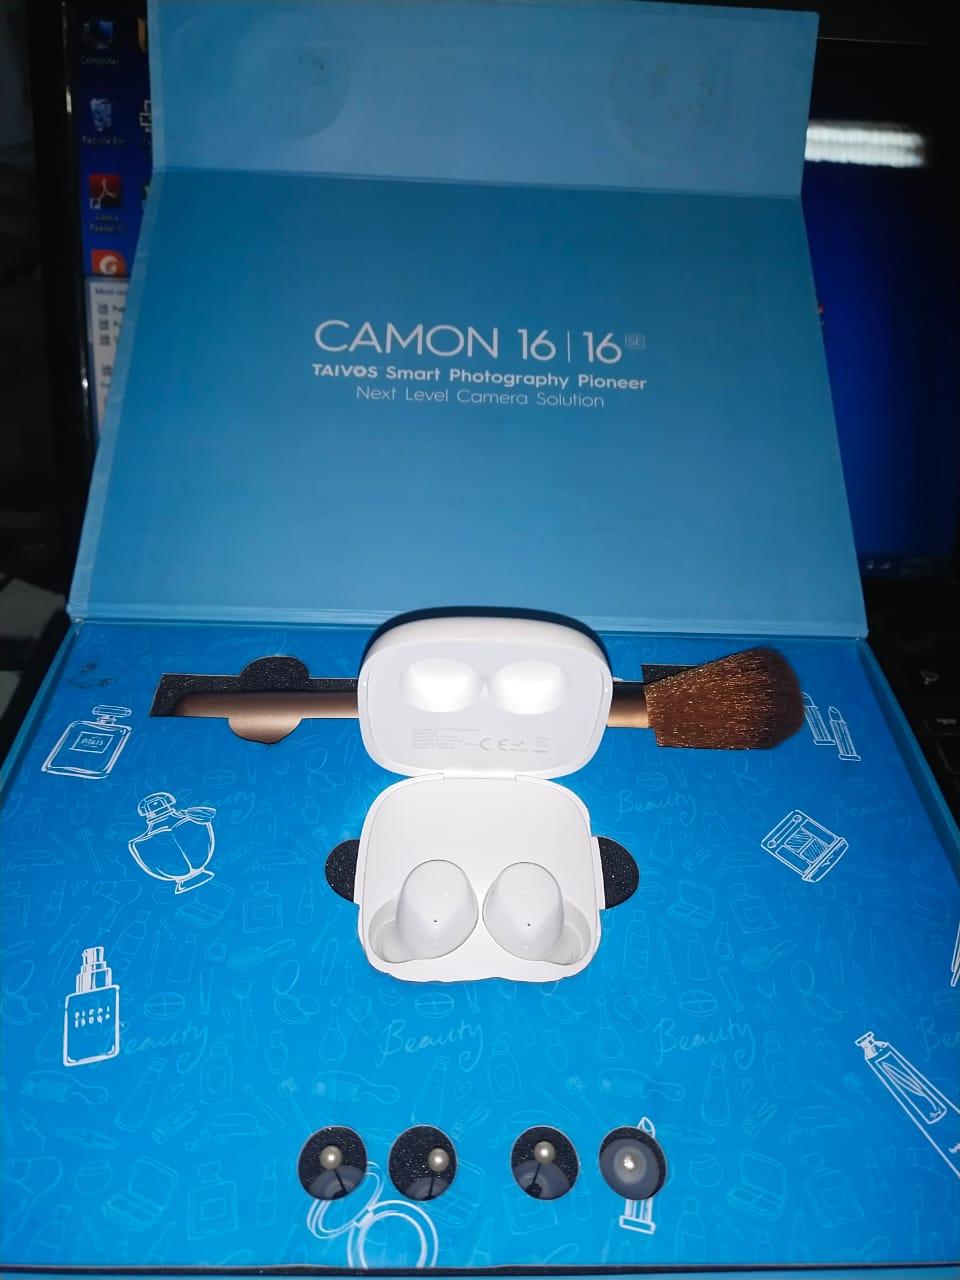 CAMON 16 Grand Launch at 8PM on November 3rd. Equipped with TAIVOS Smart Photography Solution.